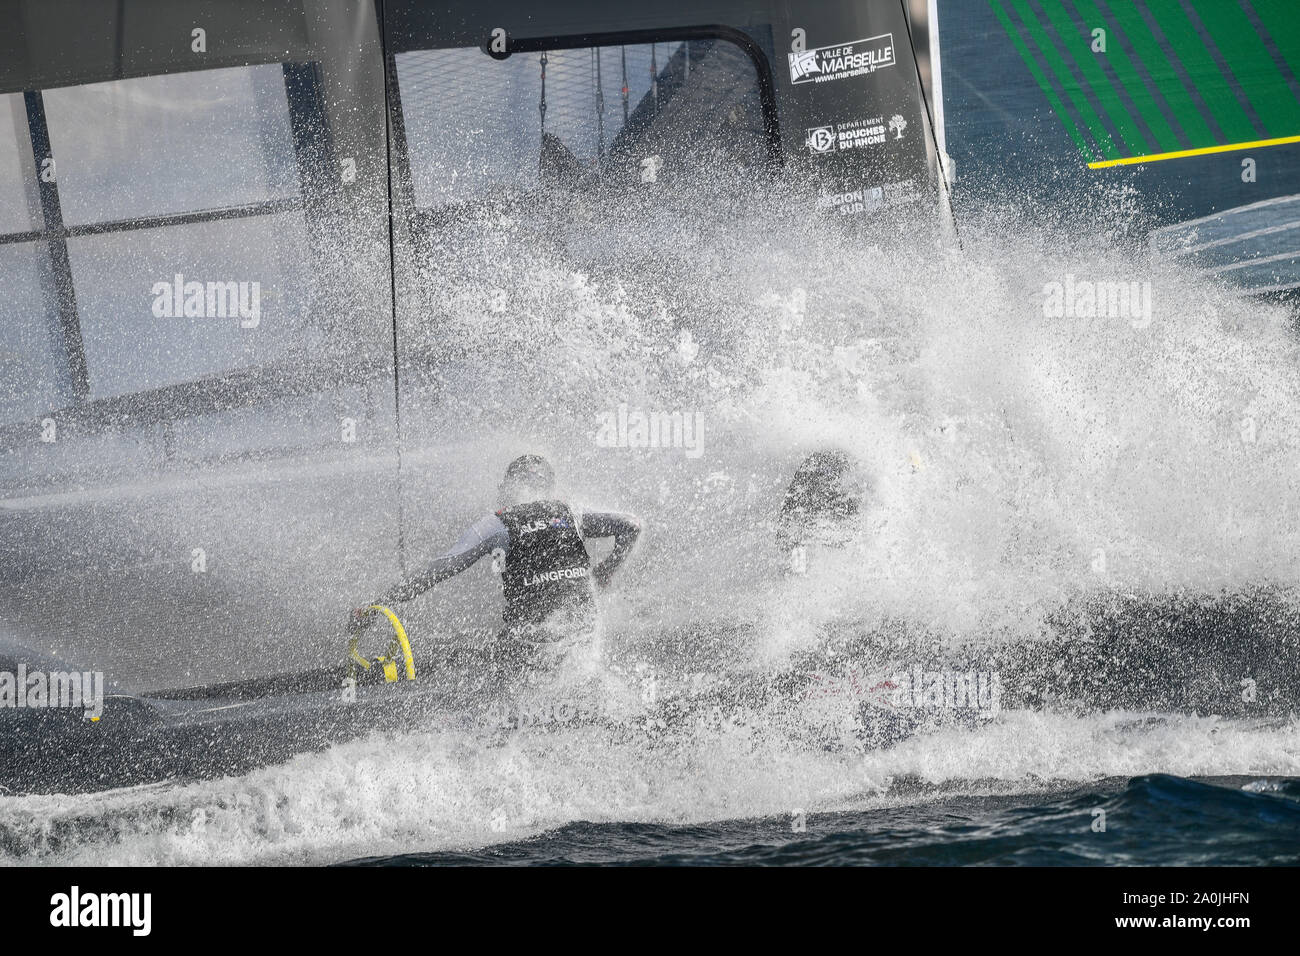 Australia SailGP Team skippered by Tom Slingsby catching a wave on the Rade de Marseille. Race Day 1. The final SailGP event of Season 1 in Marseille, France. Stock Photo